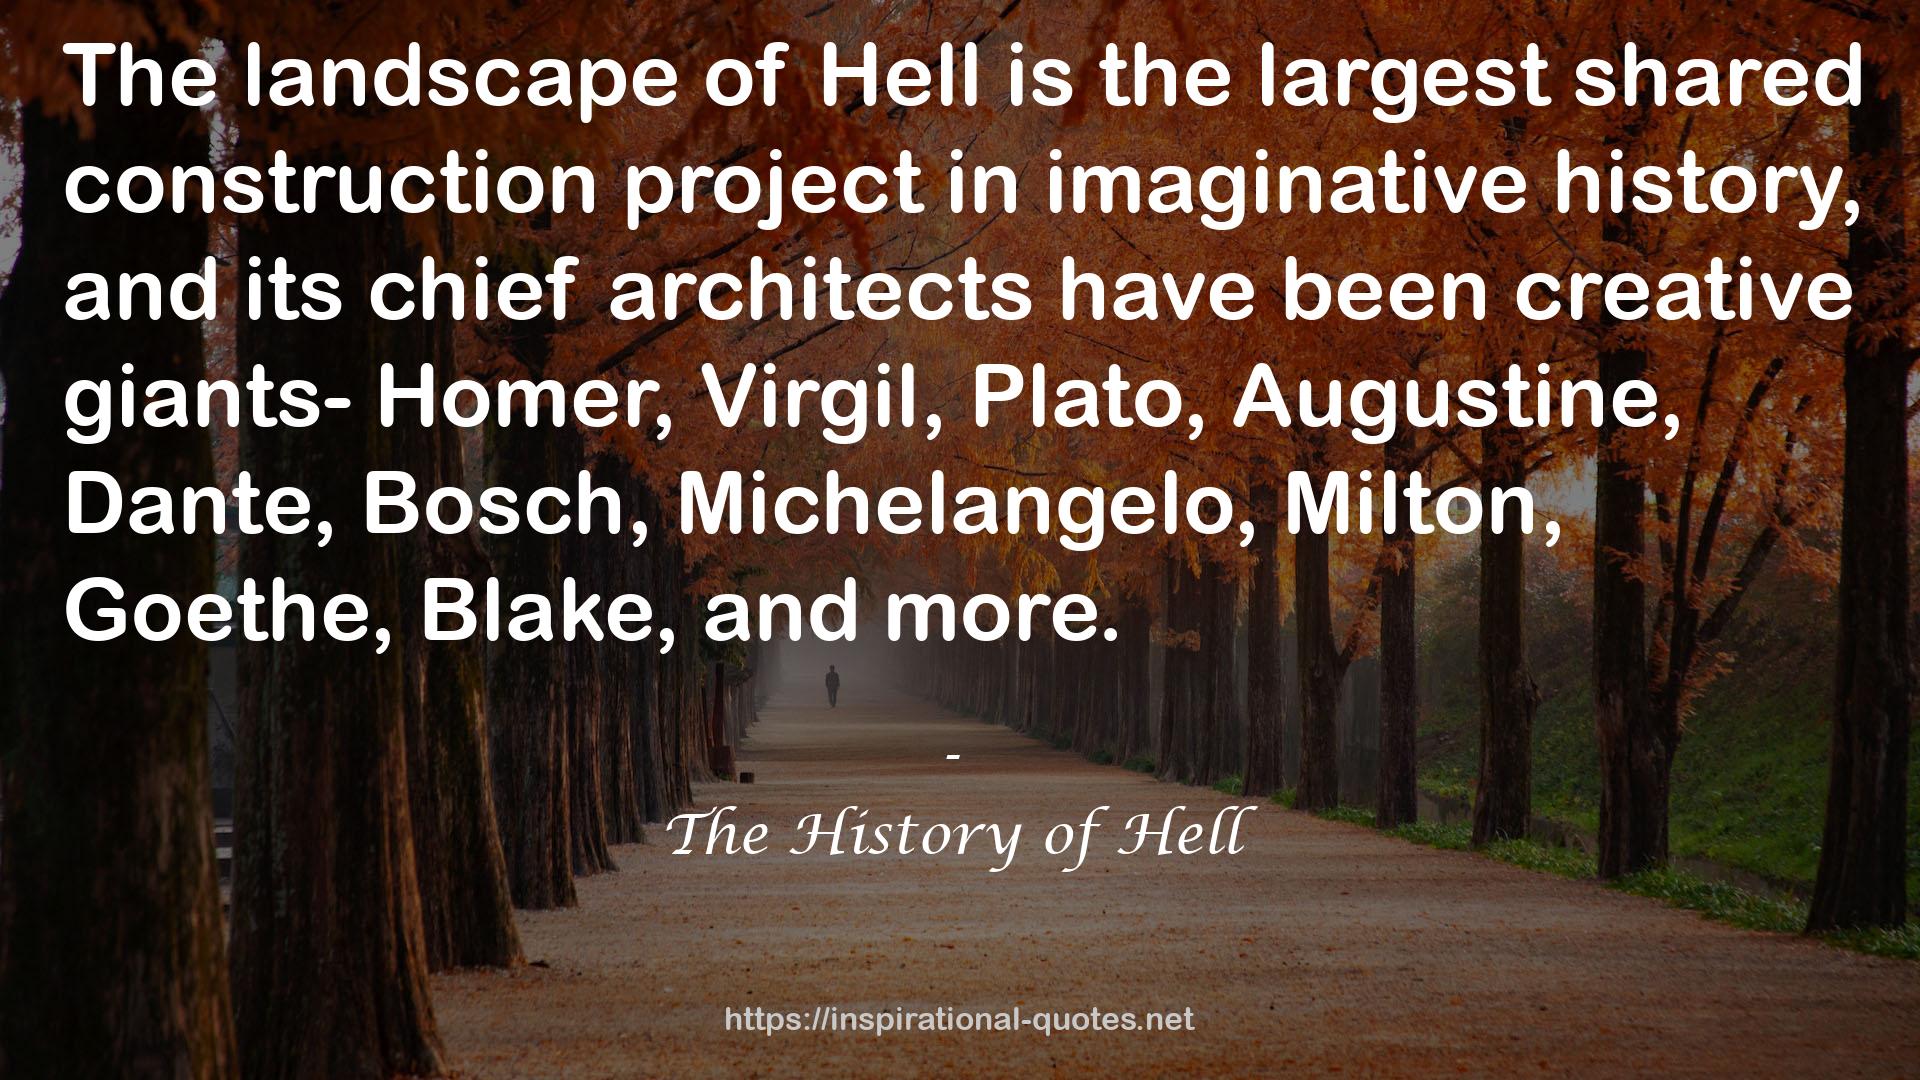 The History of Hell QUOTES